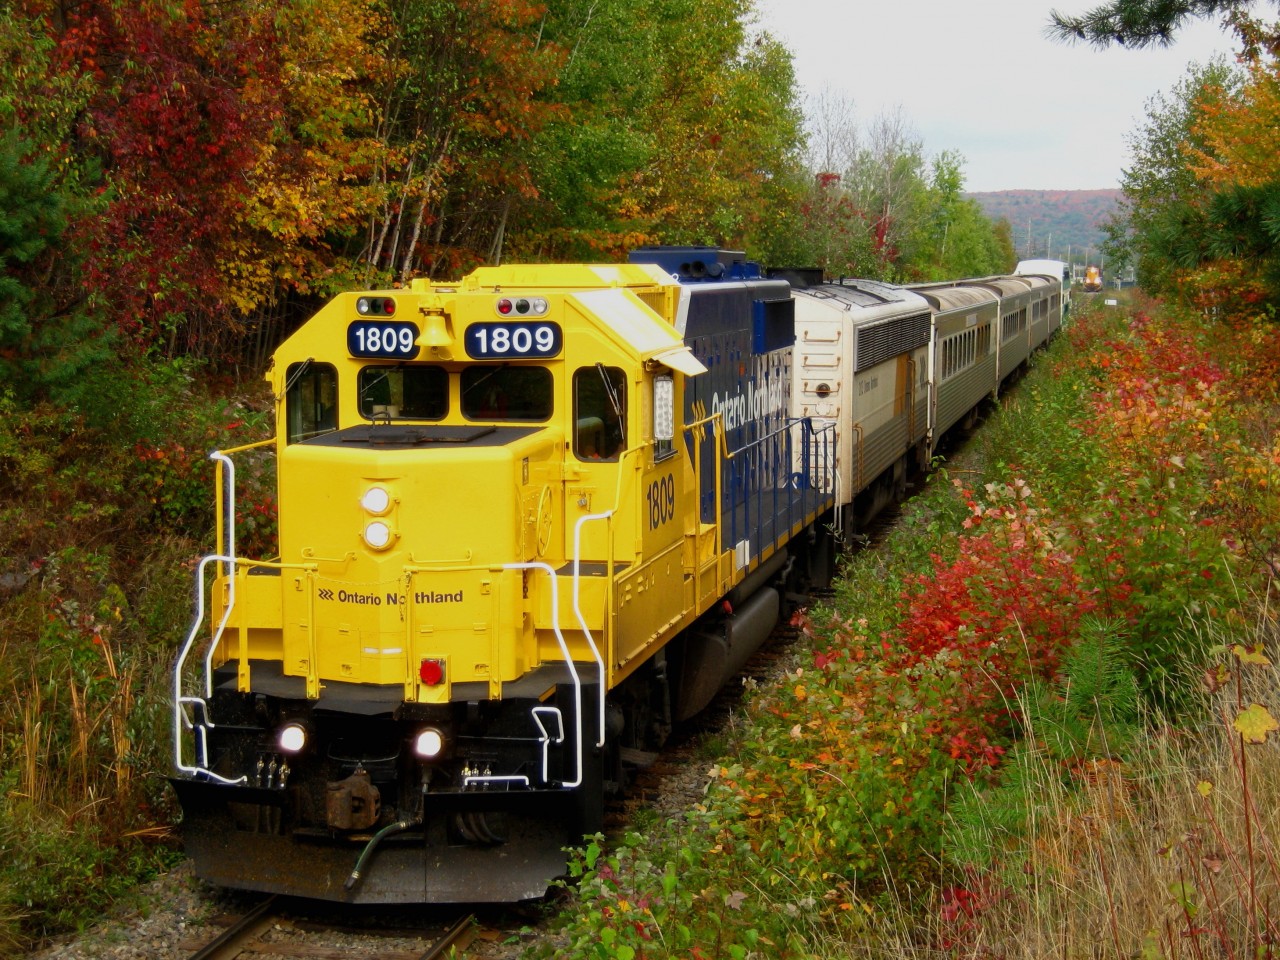 ONR #1809 pulling the Northlander consist plus a GO coach at mile 1 of the Temagami sub in North Bay, On.